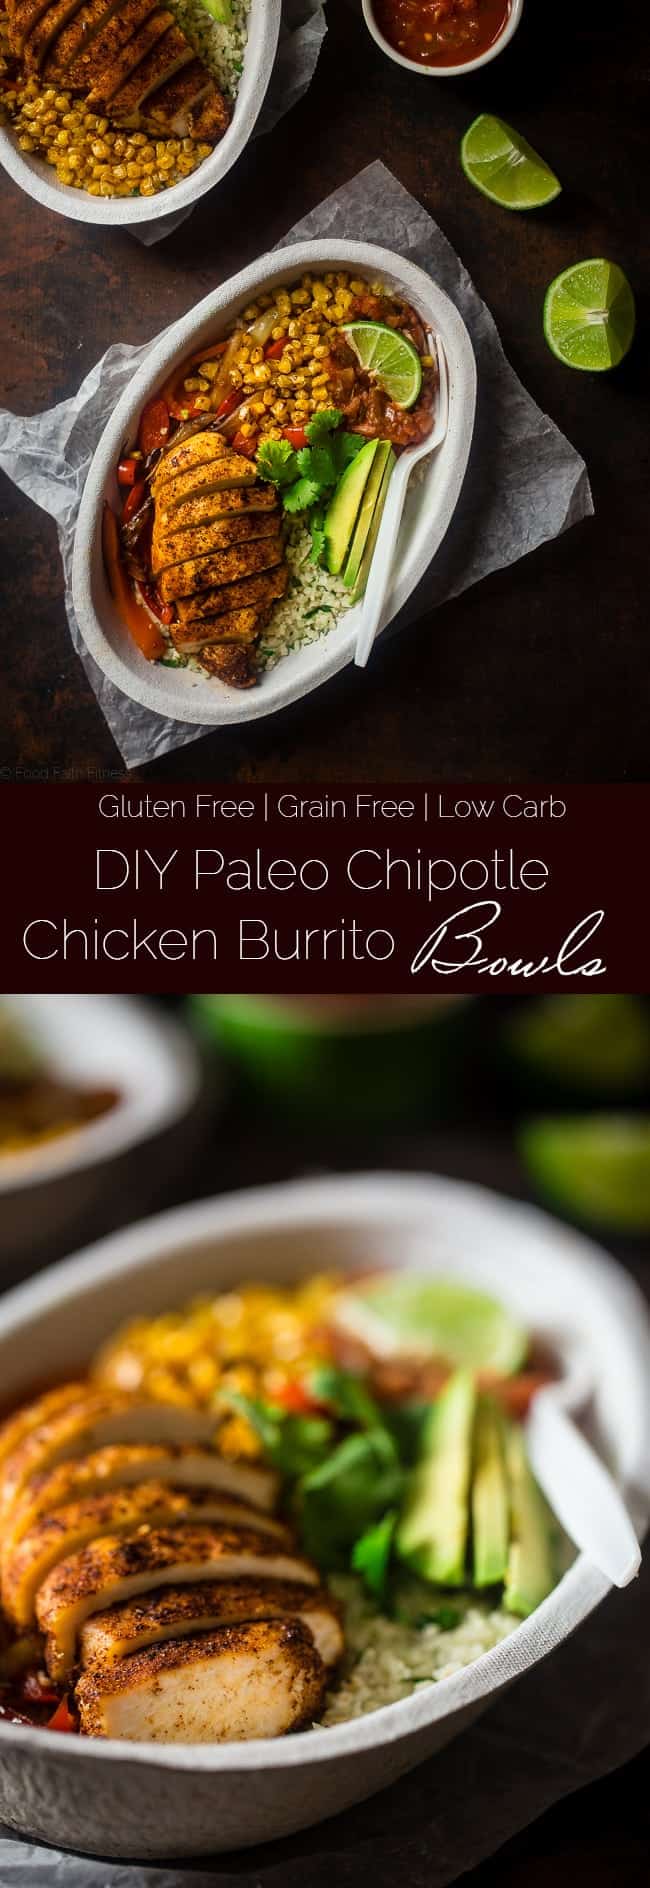 Paleo Chipotle Chicken Burrito Bowls - Make your own healthy, gluten free and paleo-friendly Chipotle Burrito Bowl at home with this quick and easy, 30 minute recipe! It's perfect for busy weeknights and under 450 calories! | Foodfaithfitness.com | @FoodFaithFit